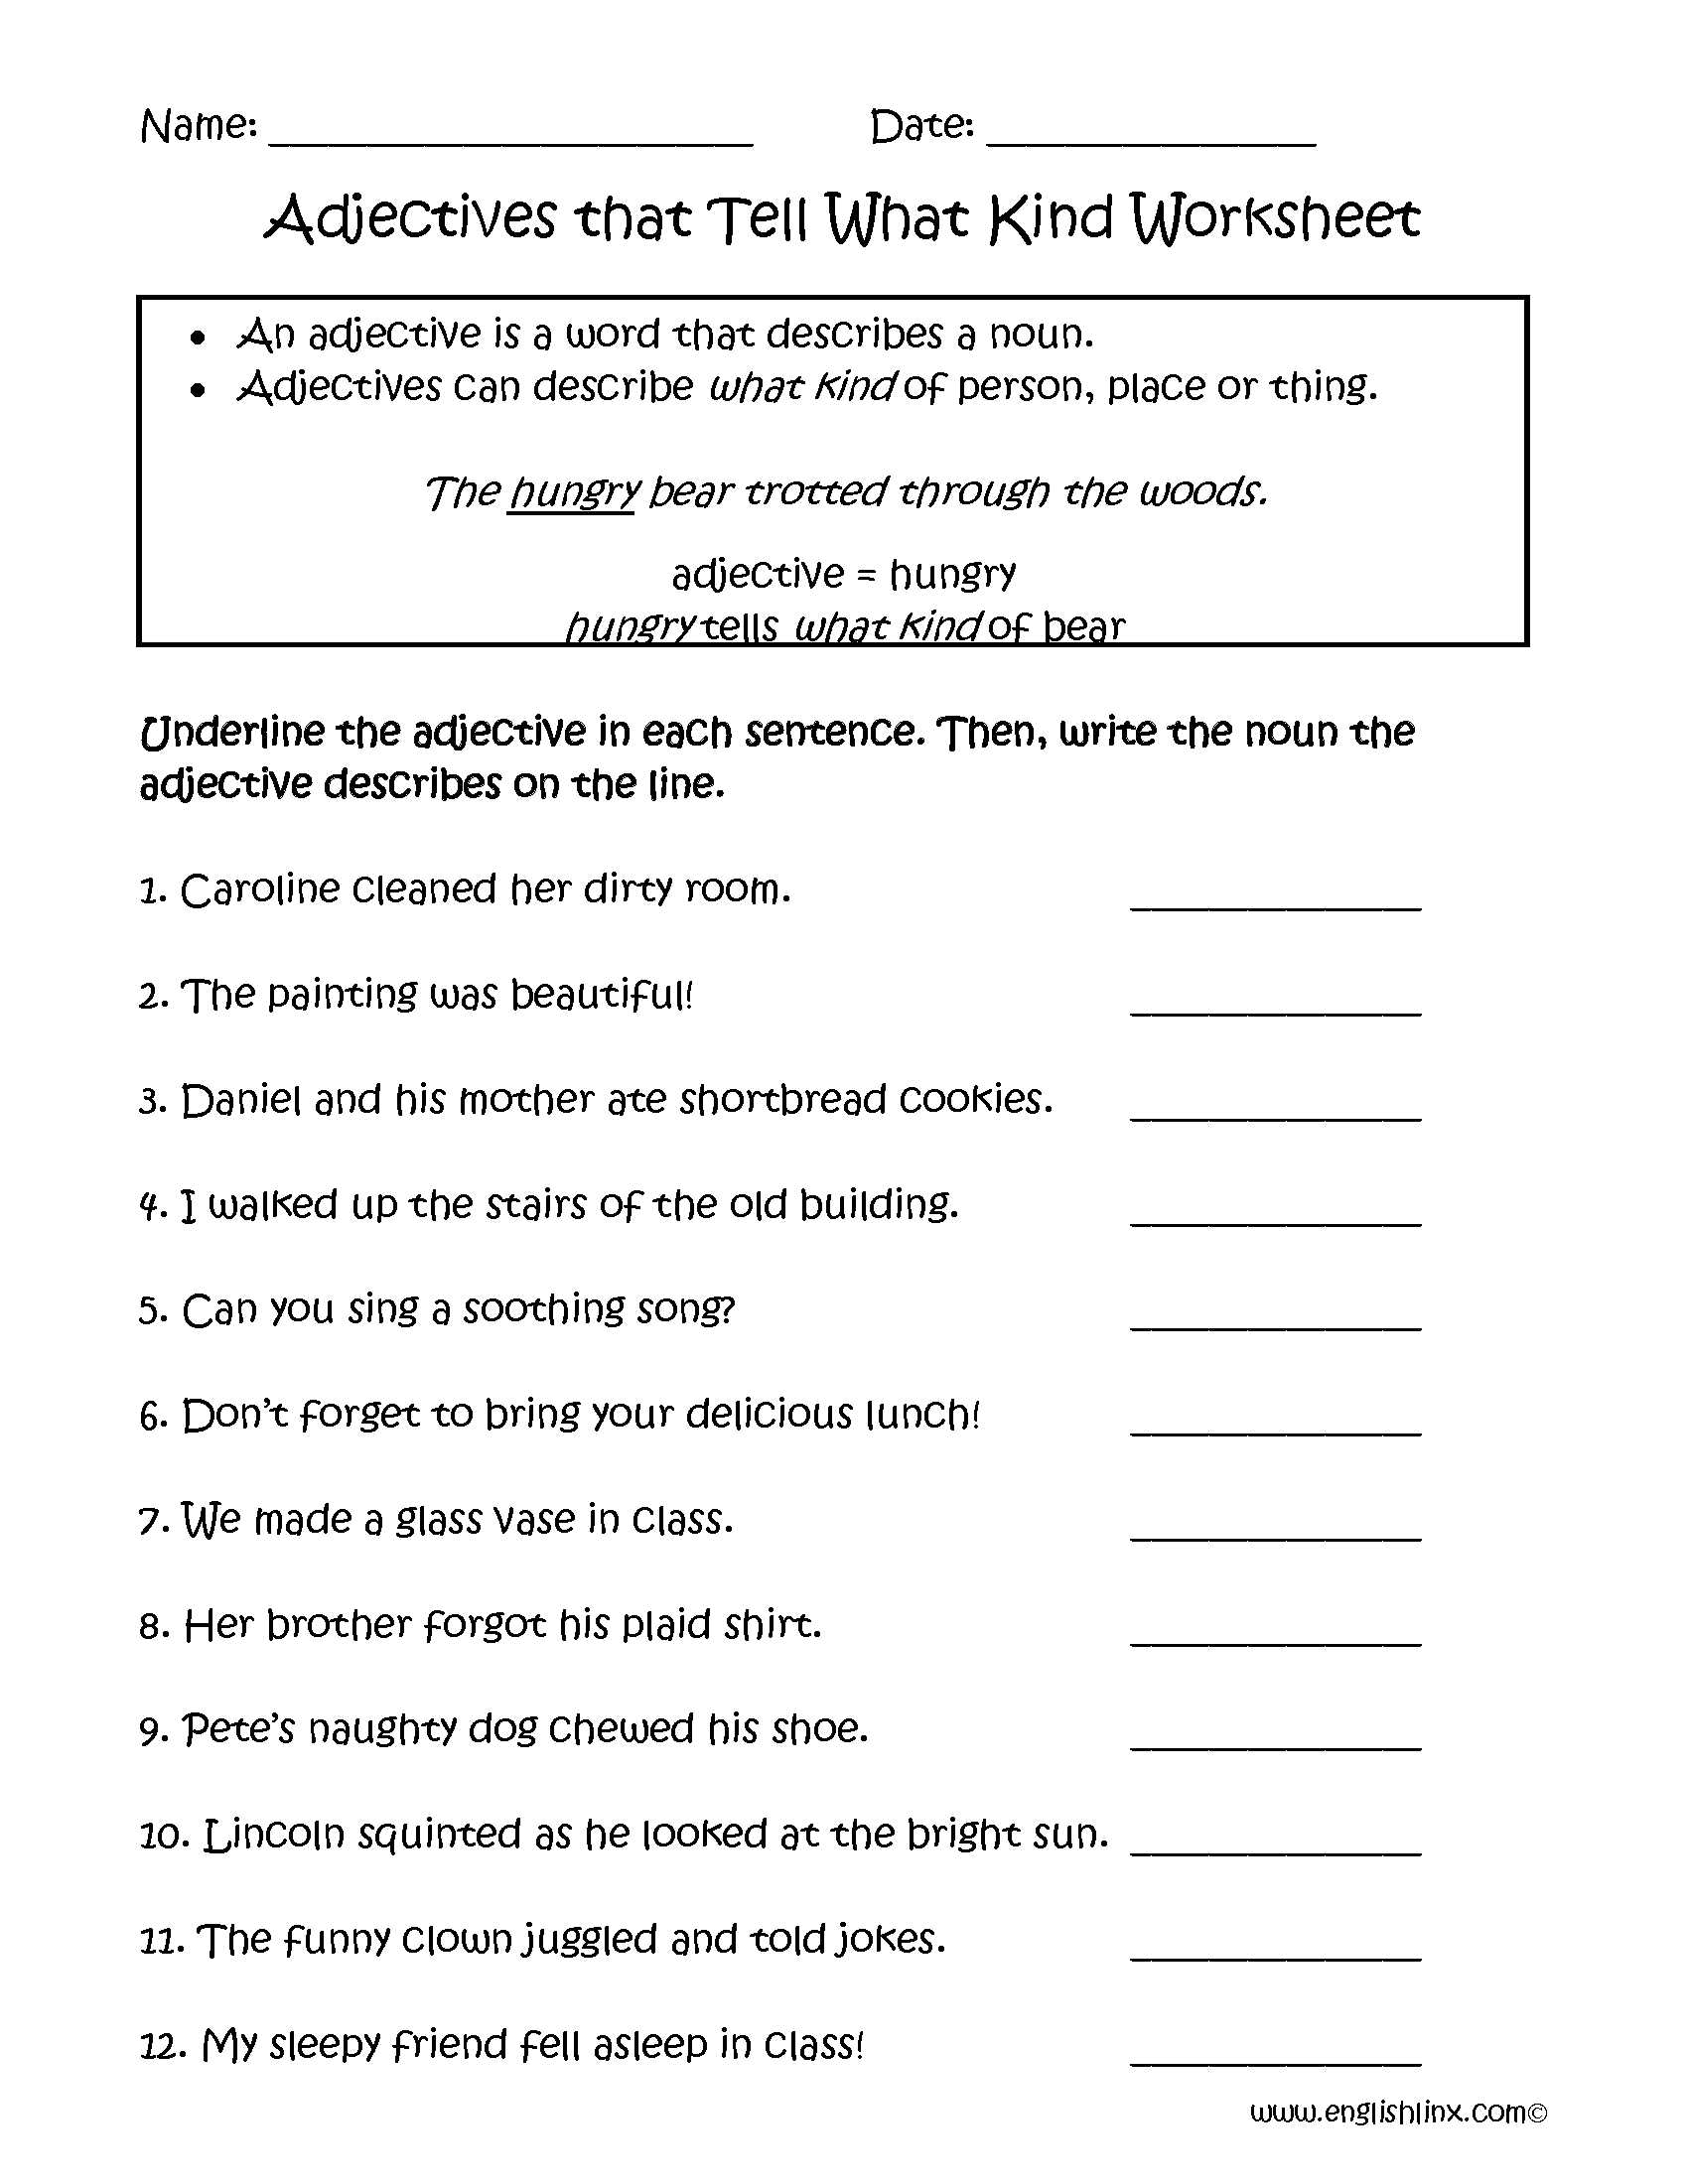 Subject Verb Agreement Practice Worksheets and Adjectives that Tell What Kind Worksheets